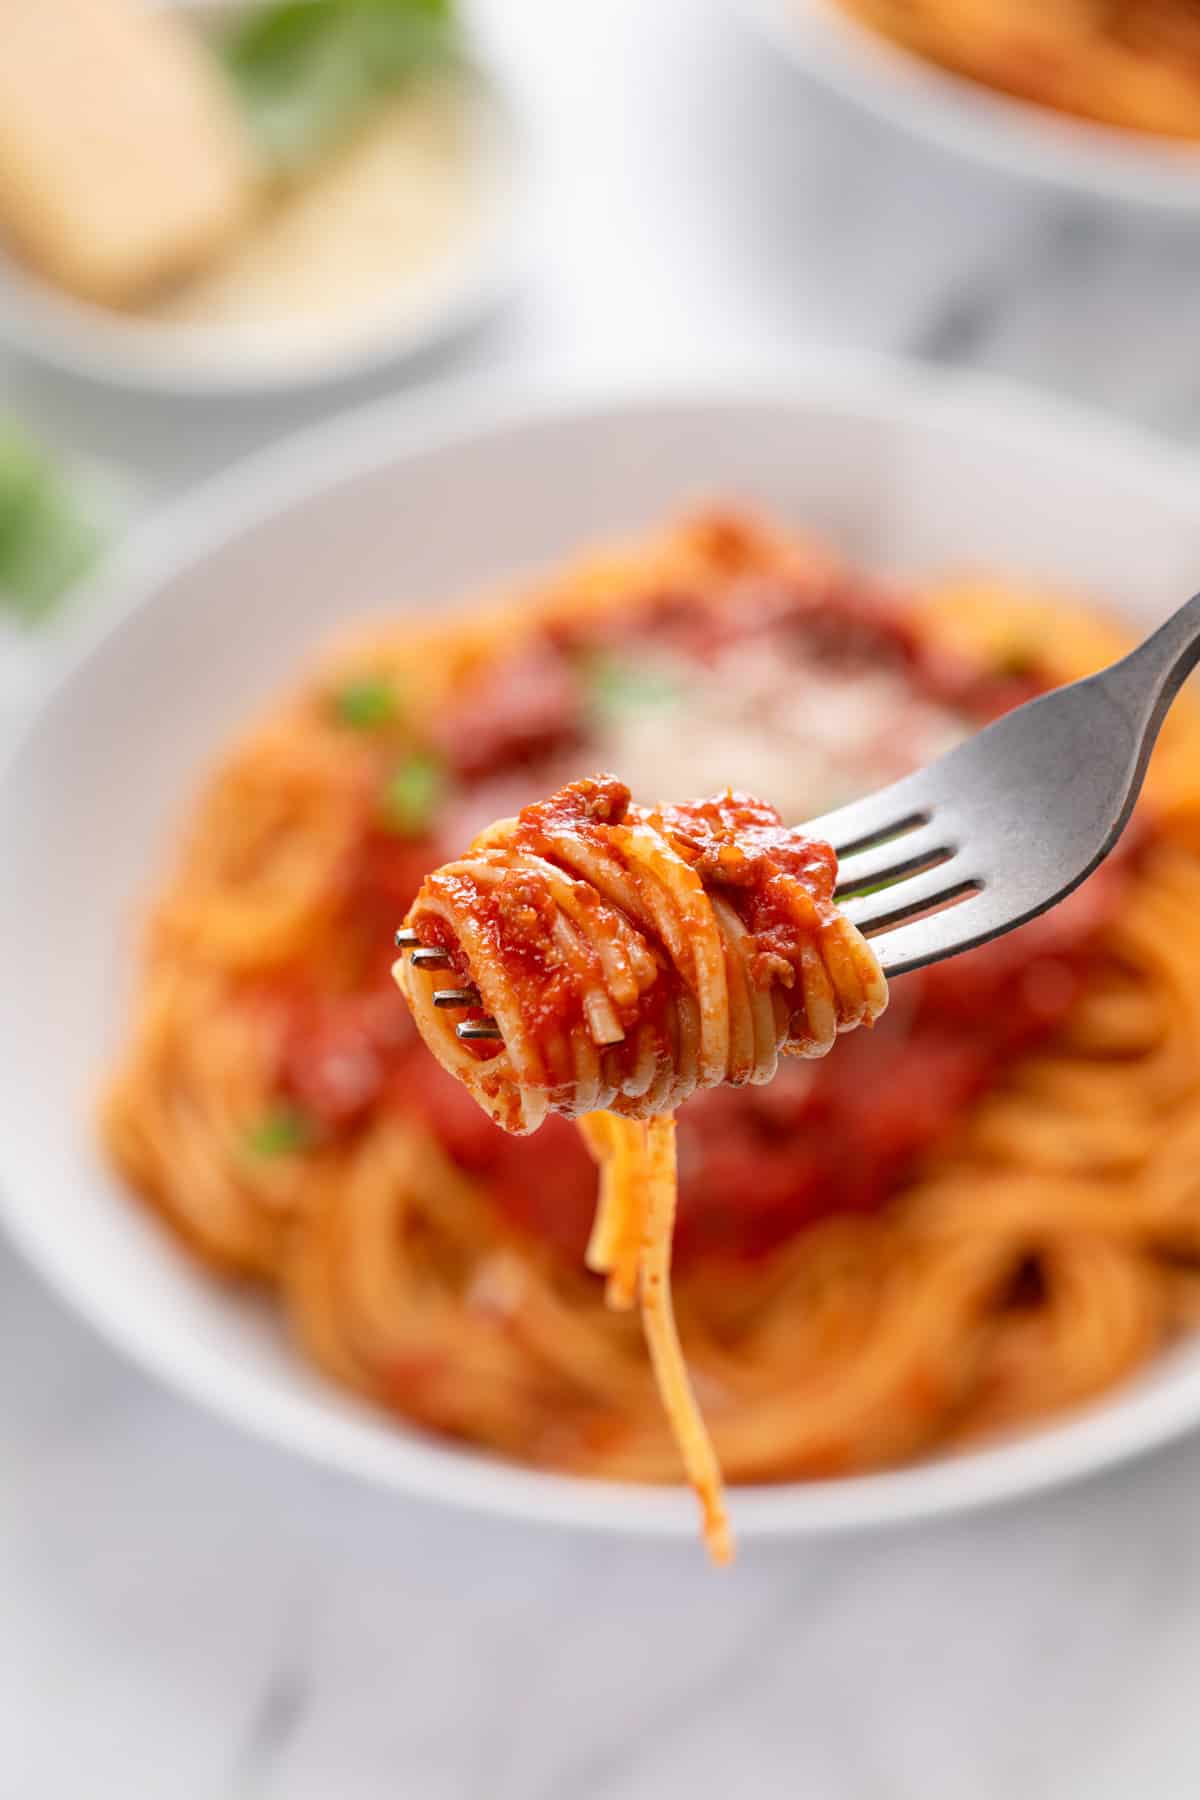 Fork holding up a bite of spaghetti.